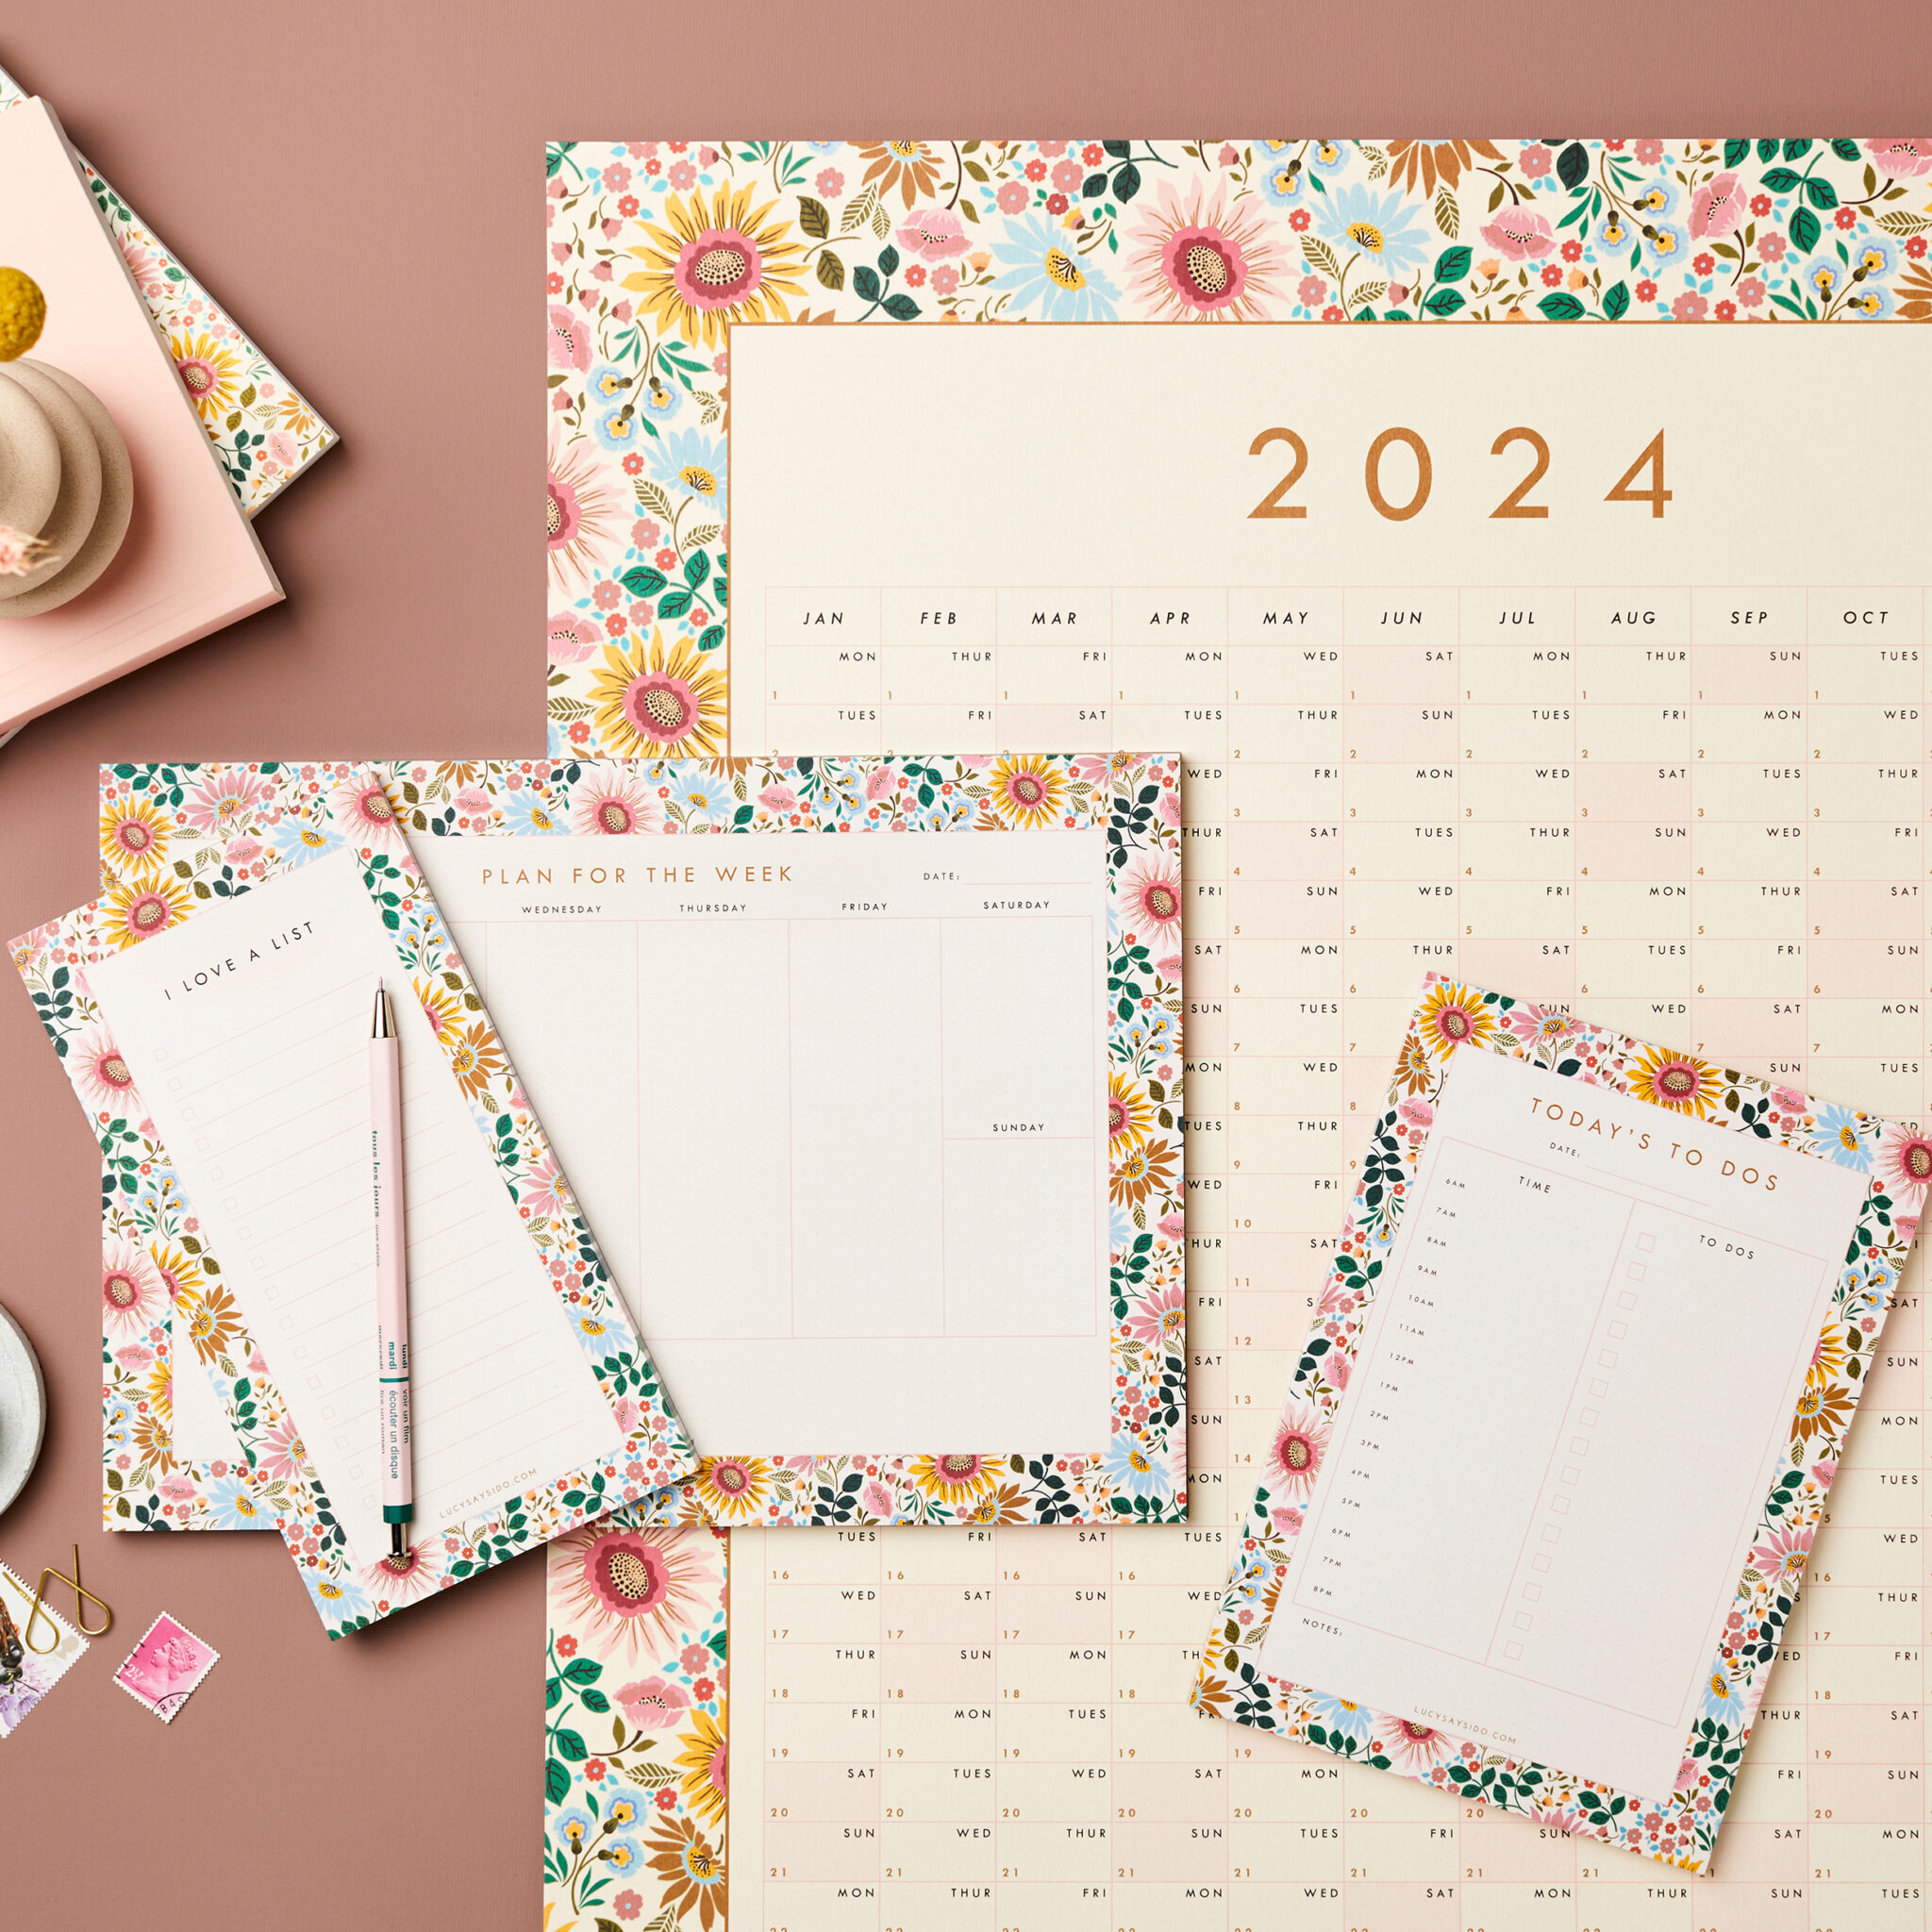 stationery bundle 2 - 2024 Wall Year Planner, A4 Week Planner, A5 Daily Planner and jotter sq